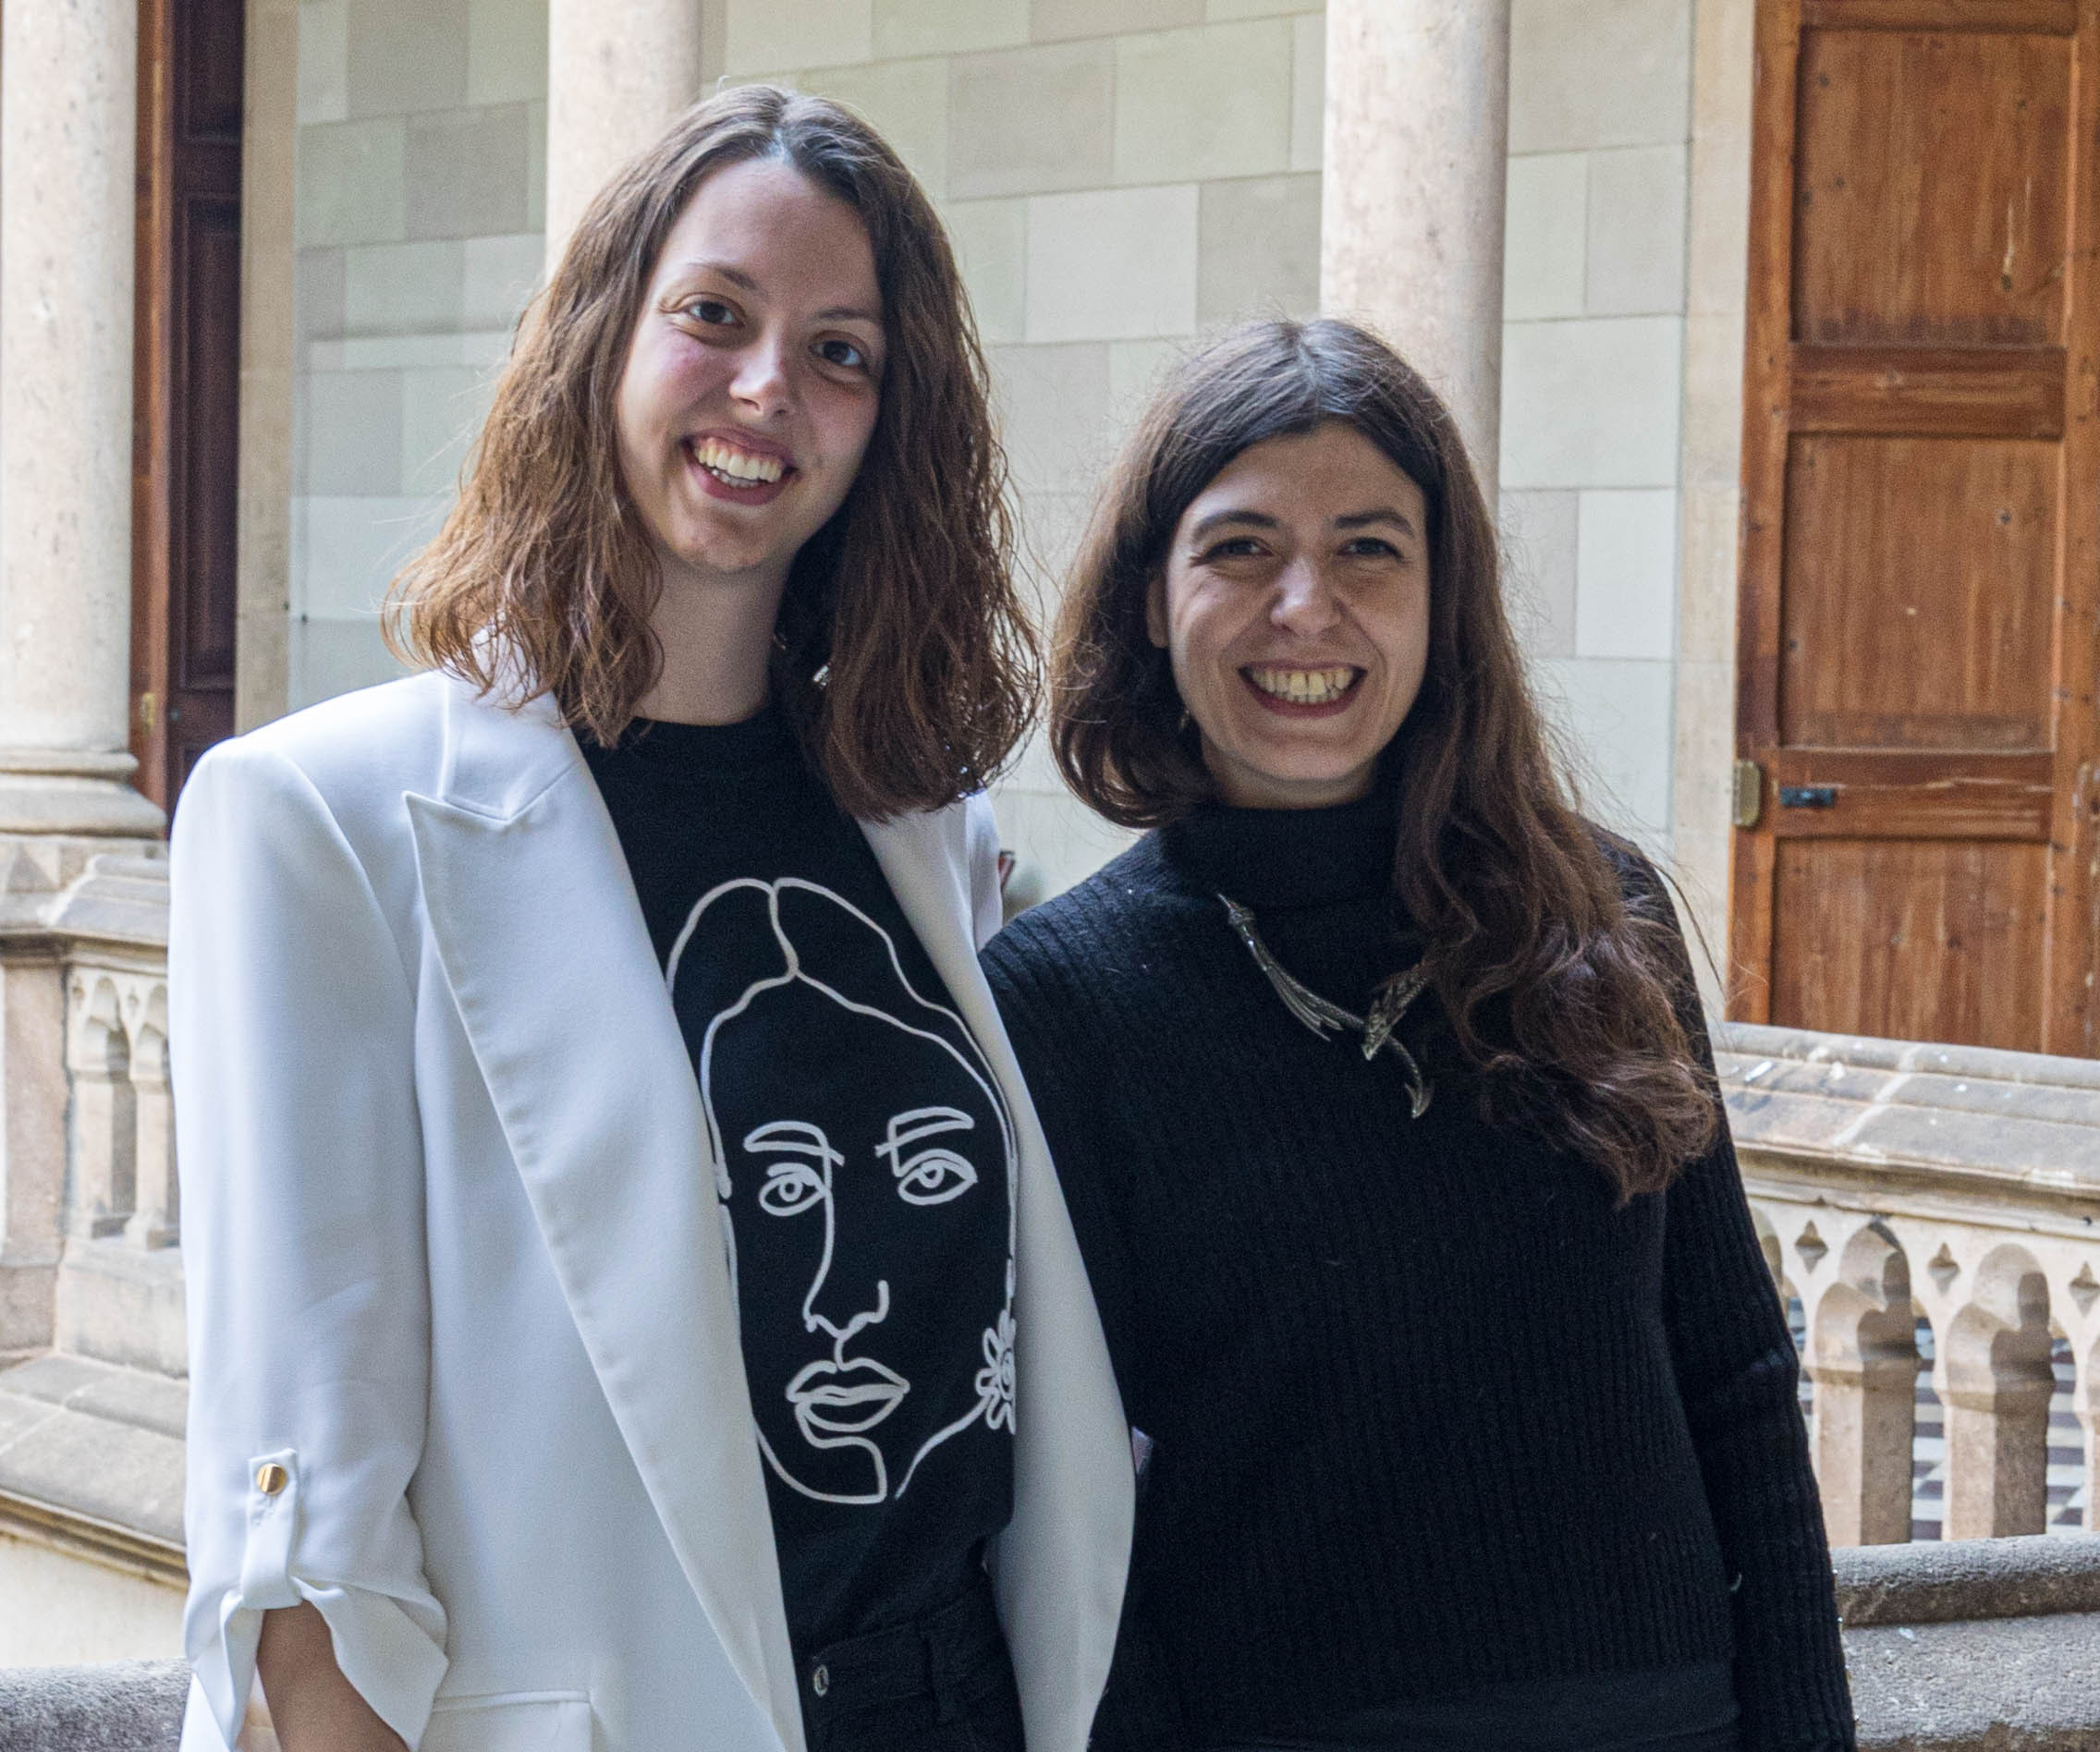 Doctoral student Irene Ferri (right) to represent the UB in Coimbra Group’s “3-Minute Thesis” competition